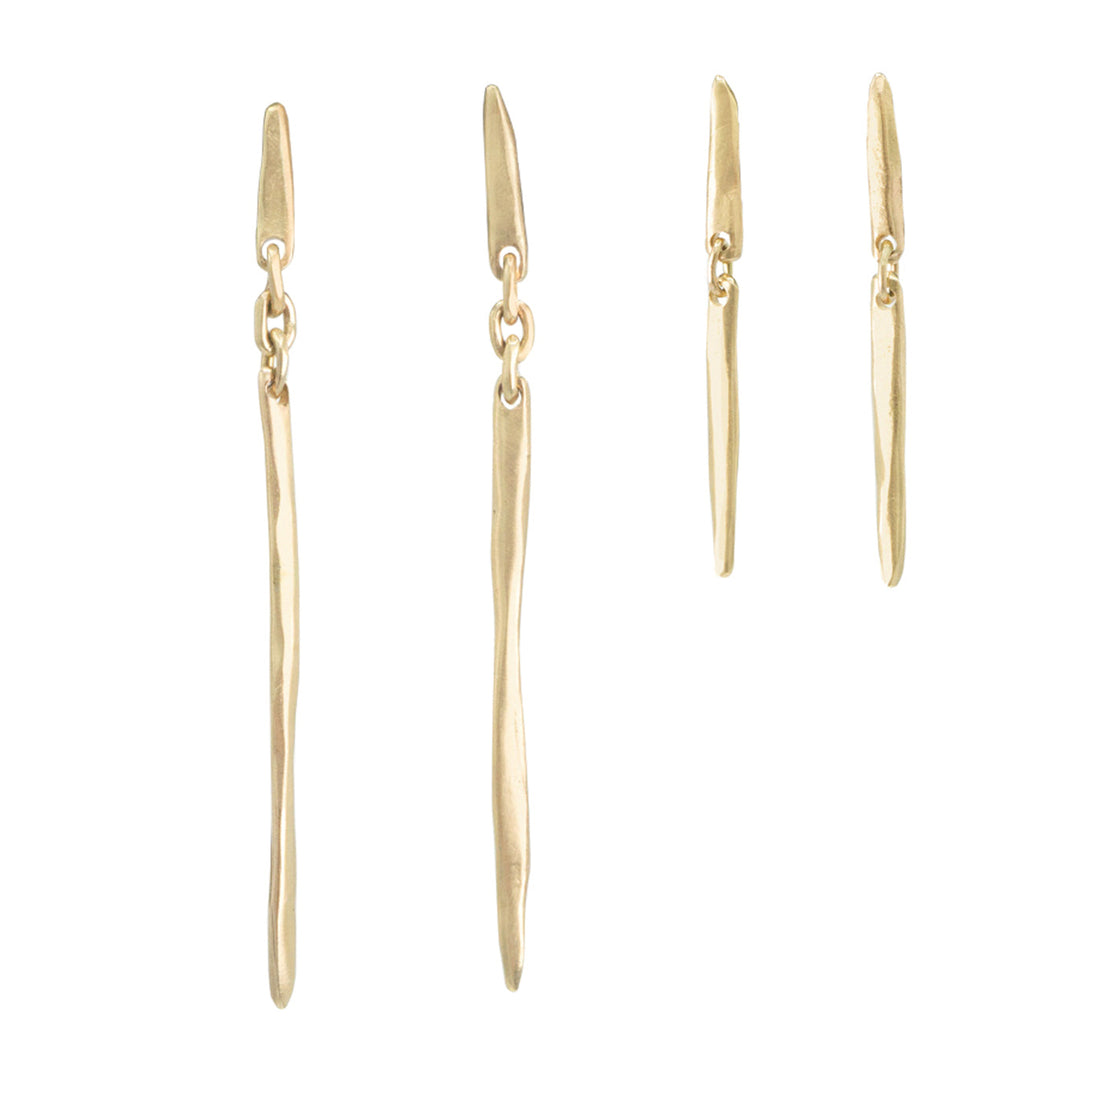 Spine Drops in 14k gold by Erin Cuff Jewelry.